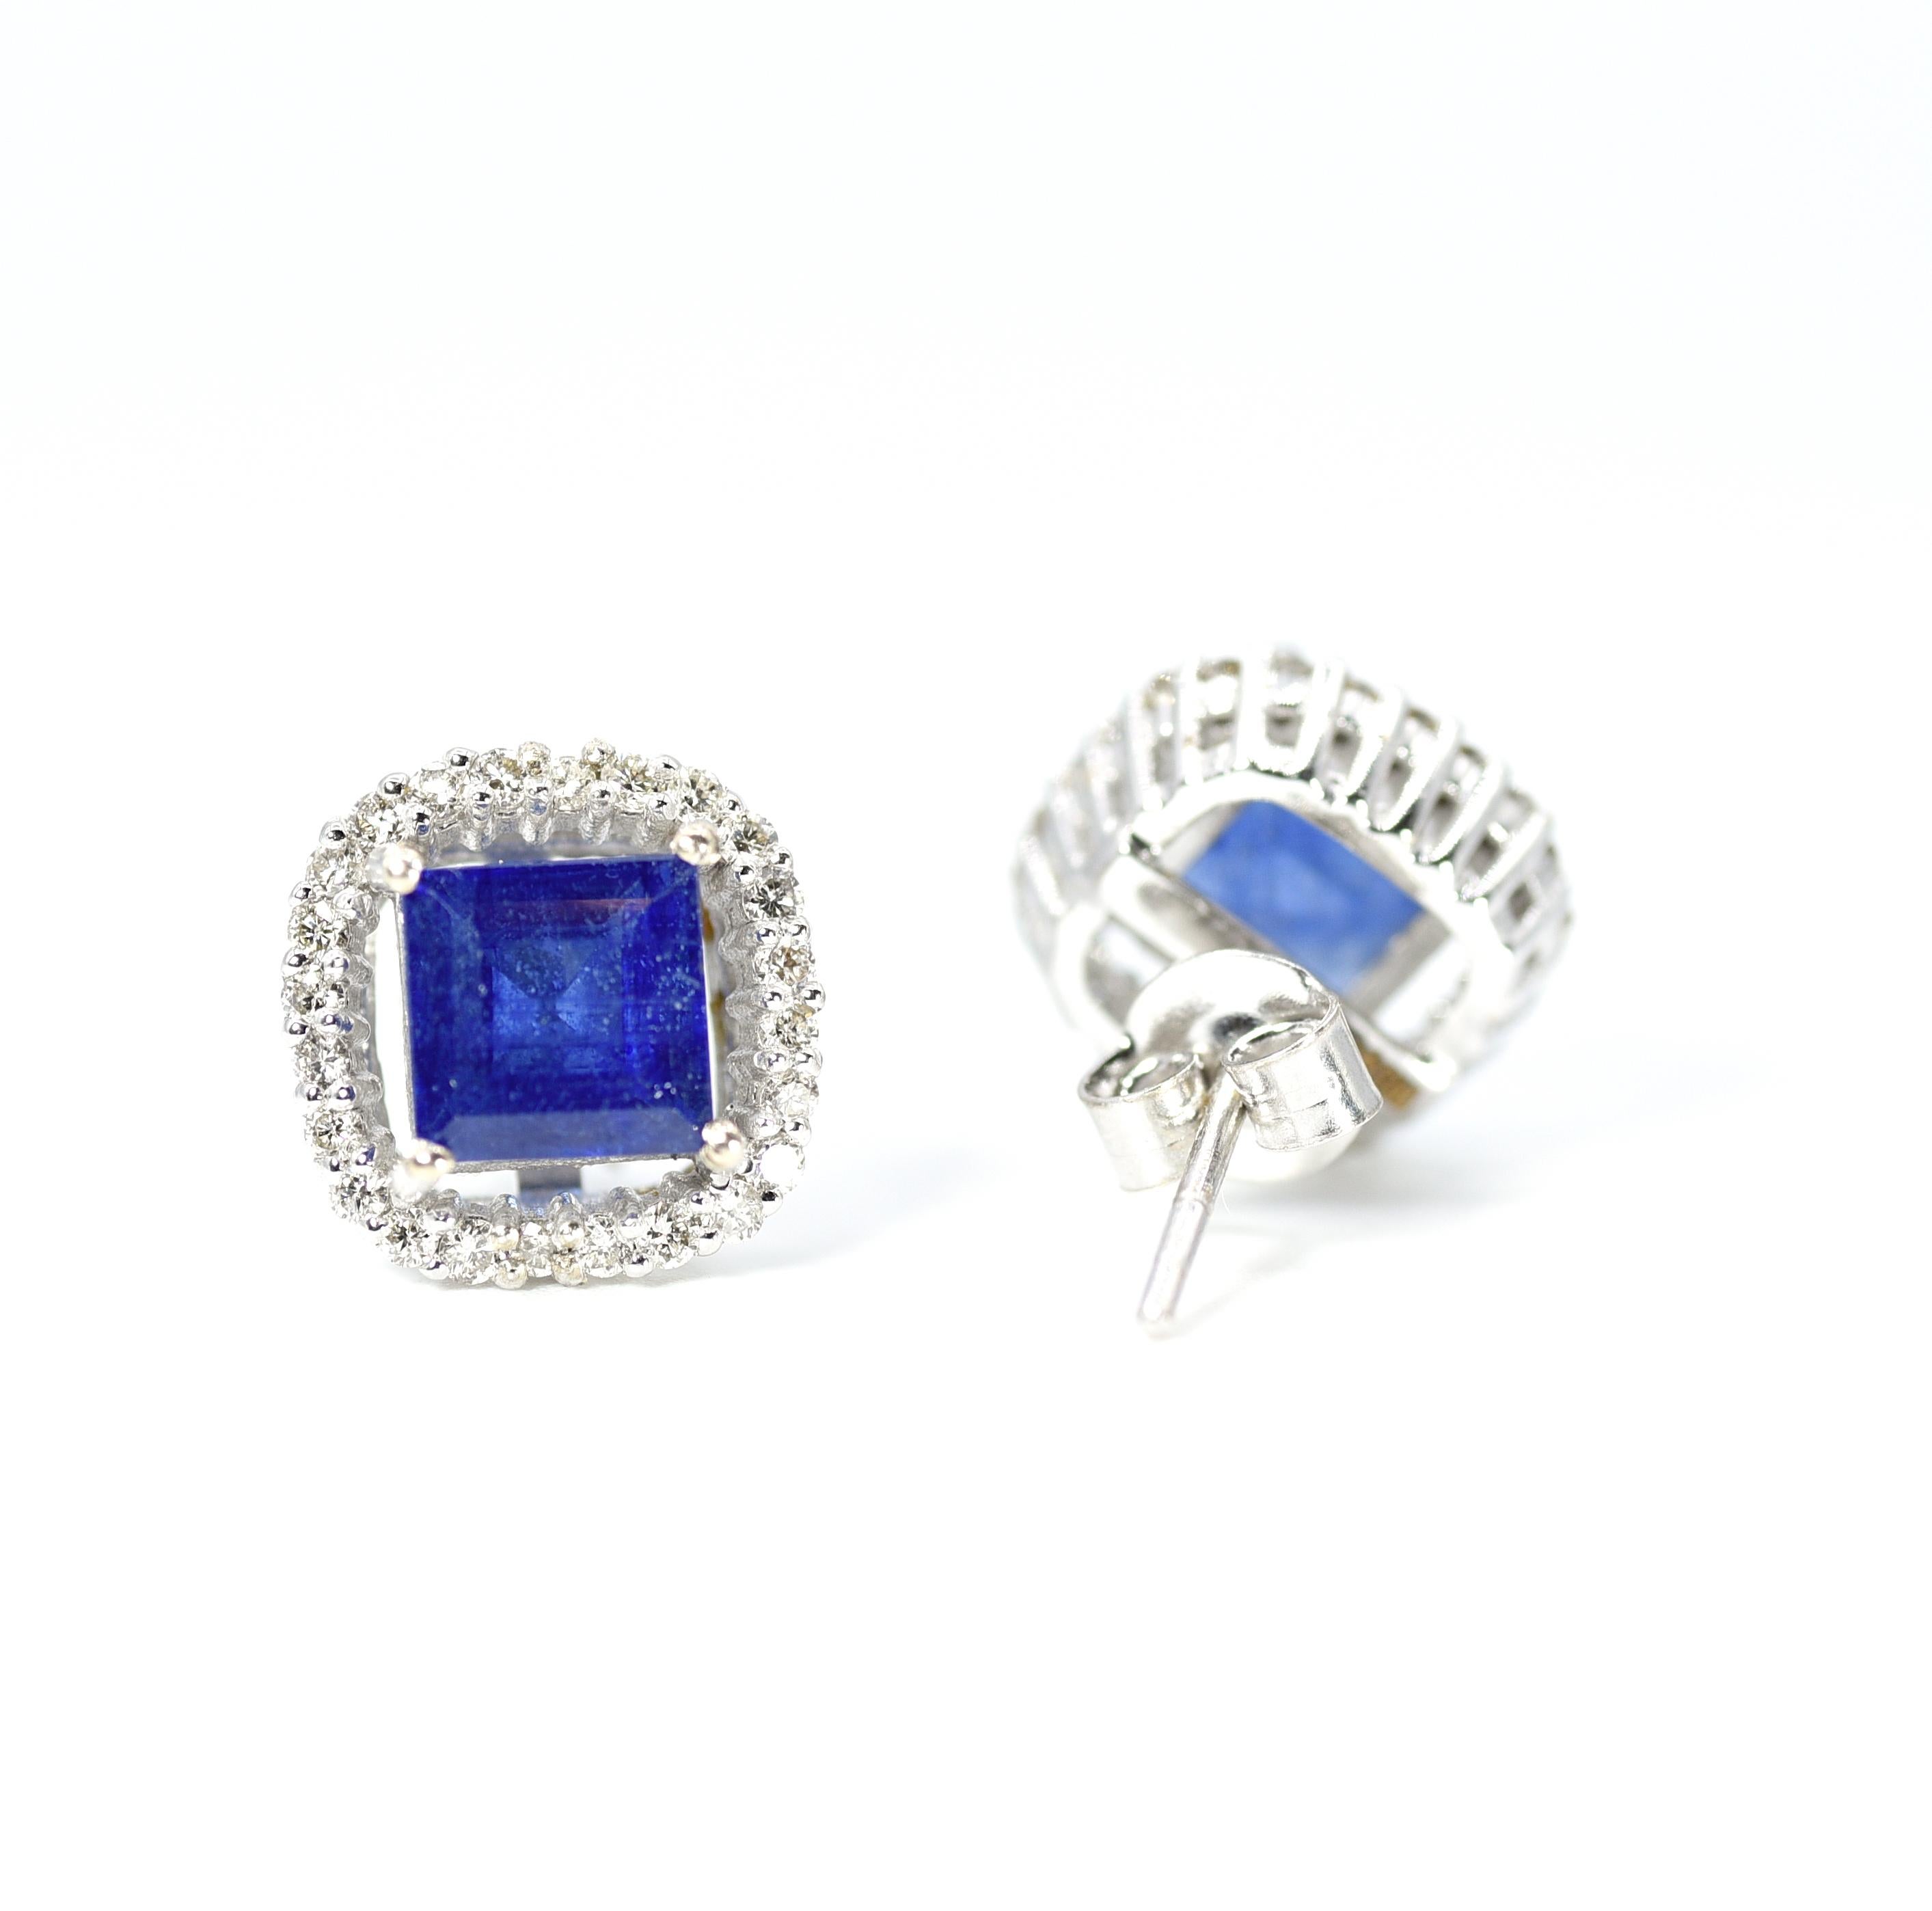 These Diamond studs reflect  an elegant blue color of sapphires which matches every attire. So if you are buying jewelry online, you do not want to miss this pair of earrings! 

Instock
18K White Gold
0.51CT Diamonds
2.56 CT Emeralds
11mm Wide
Ring